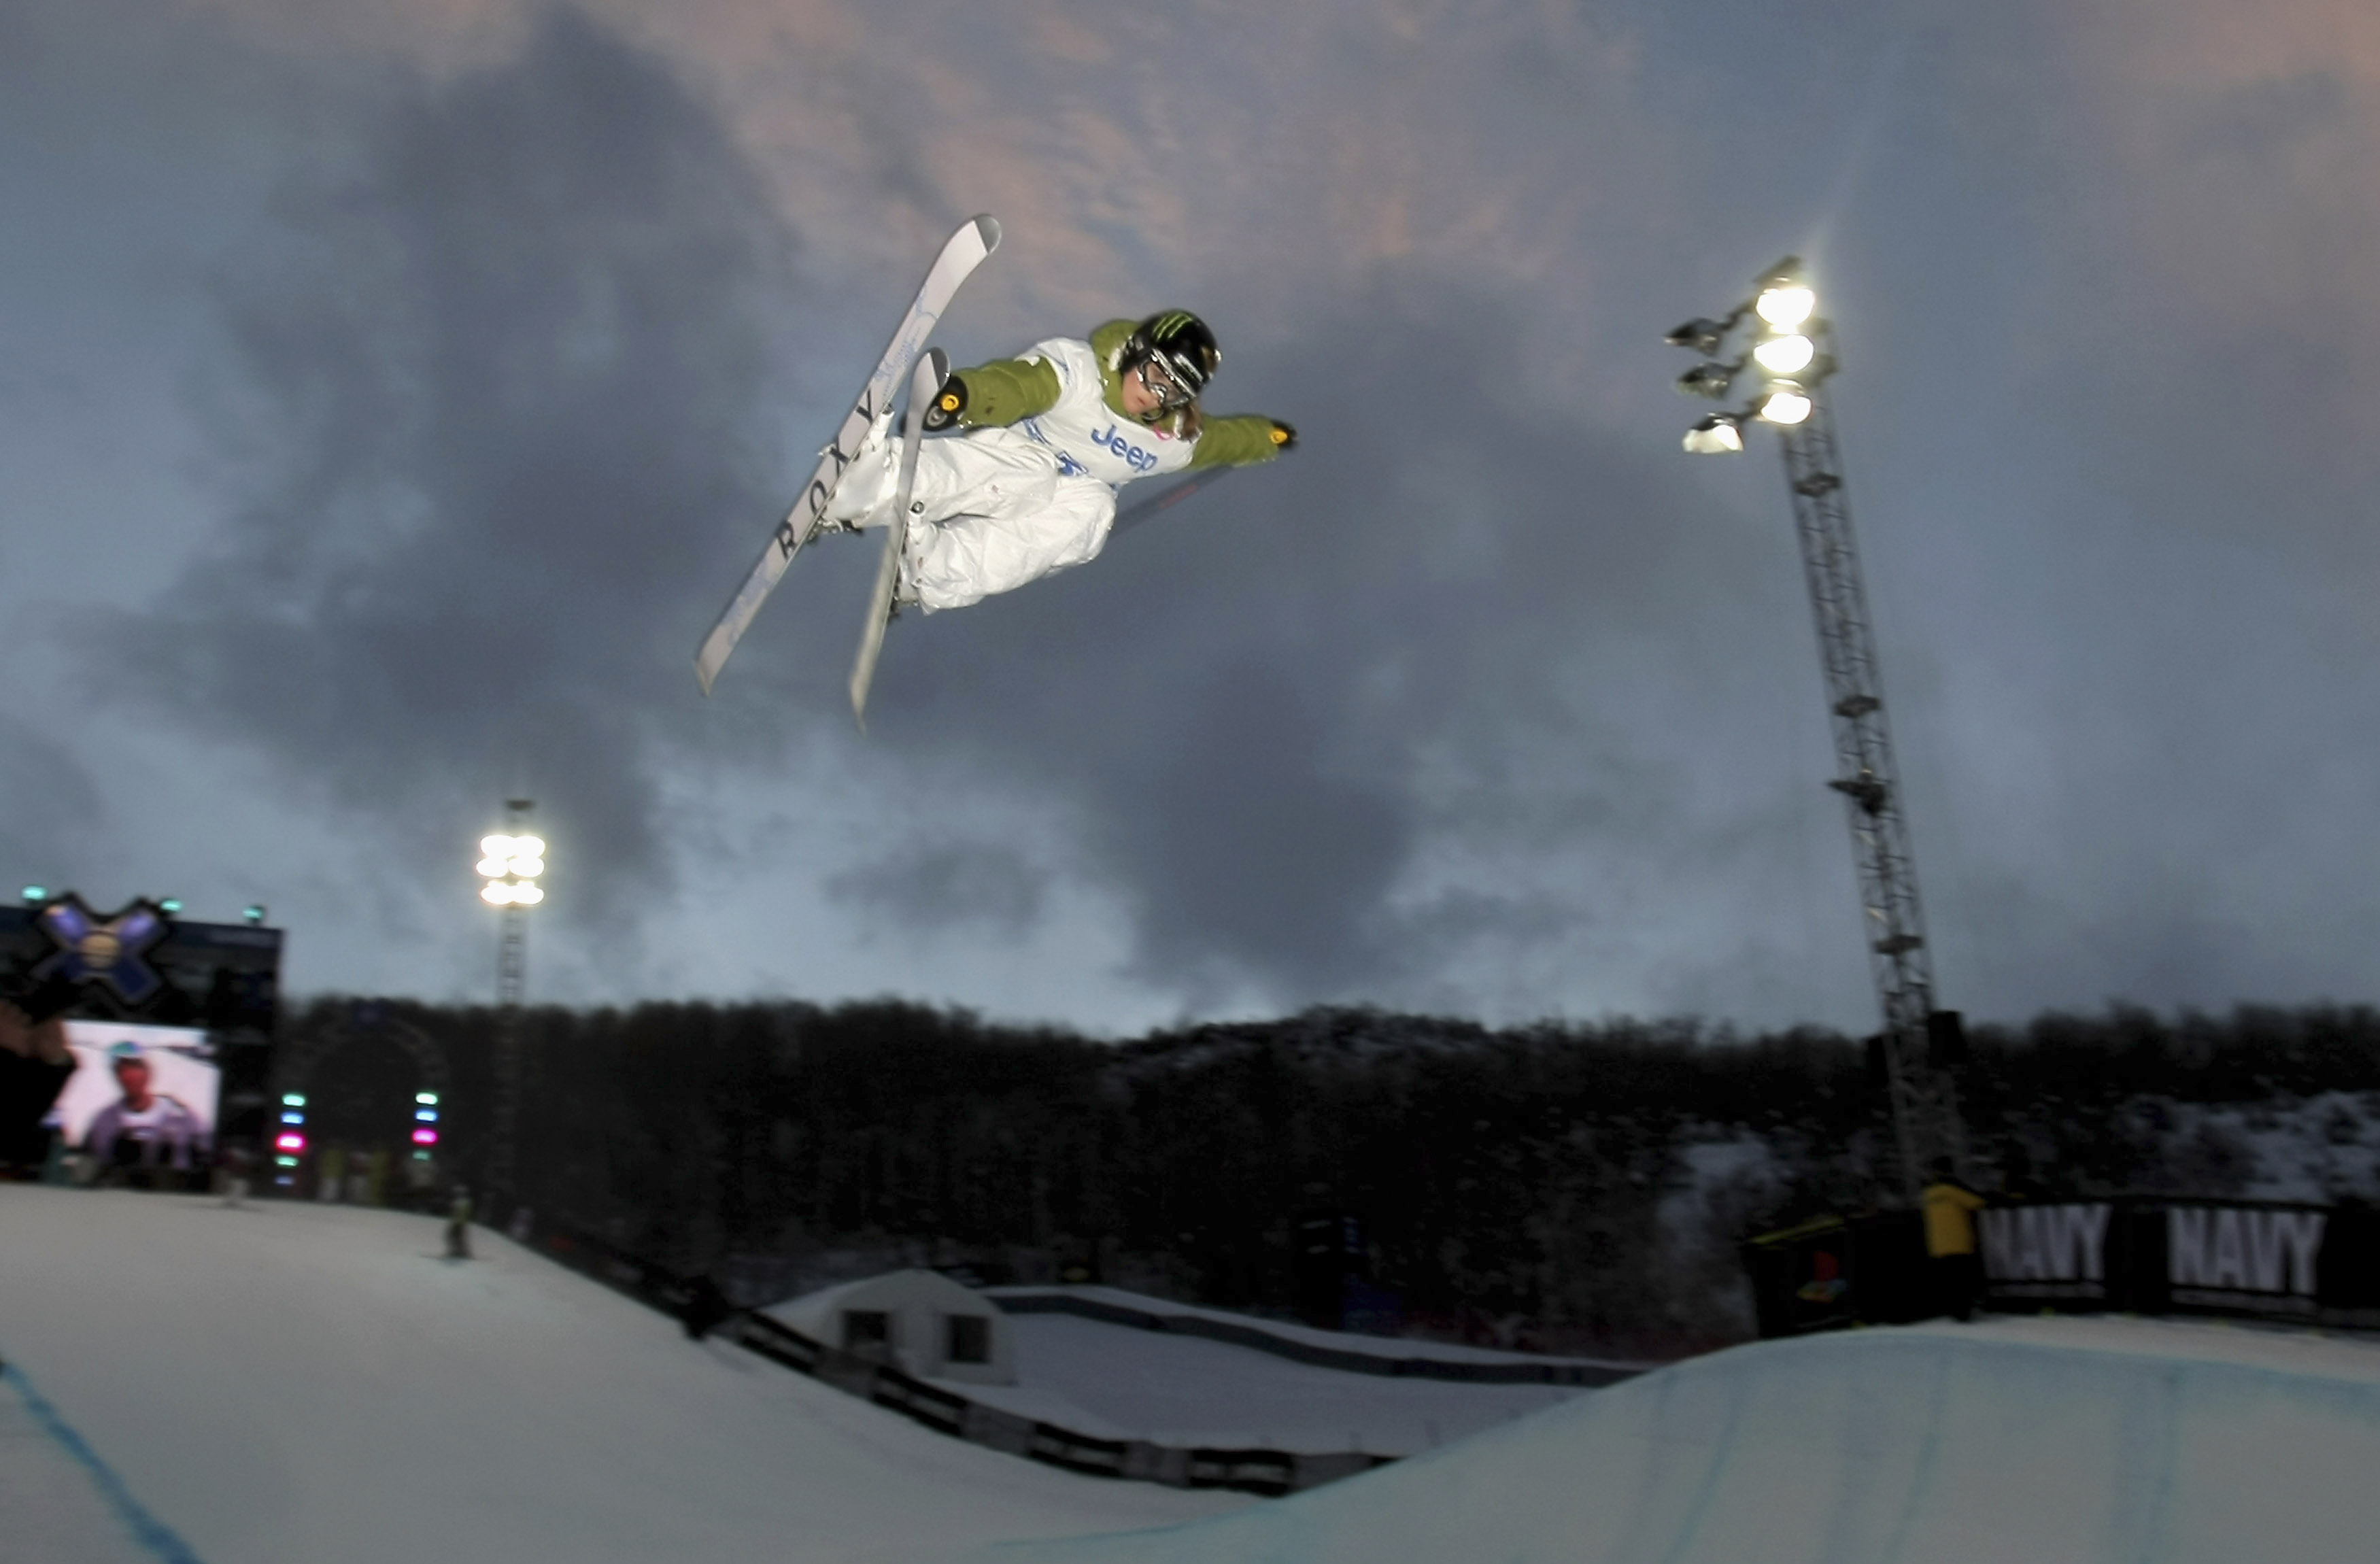 ASPEN, CO - JANUARY 25:  Sarah Burke of Whistler, BC, Canada takes a practice run before going on to win the Women's Skiing Superpipe at the Winter X Games Twelve on Buttermilk Mountain on January 25, 2008 in Aspen, Colorado.  (Photo by Doug Pensinger/Get